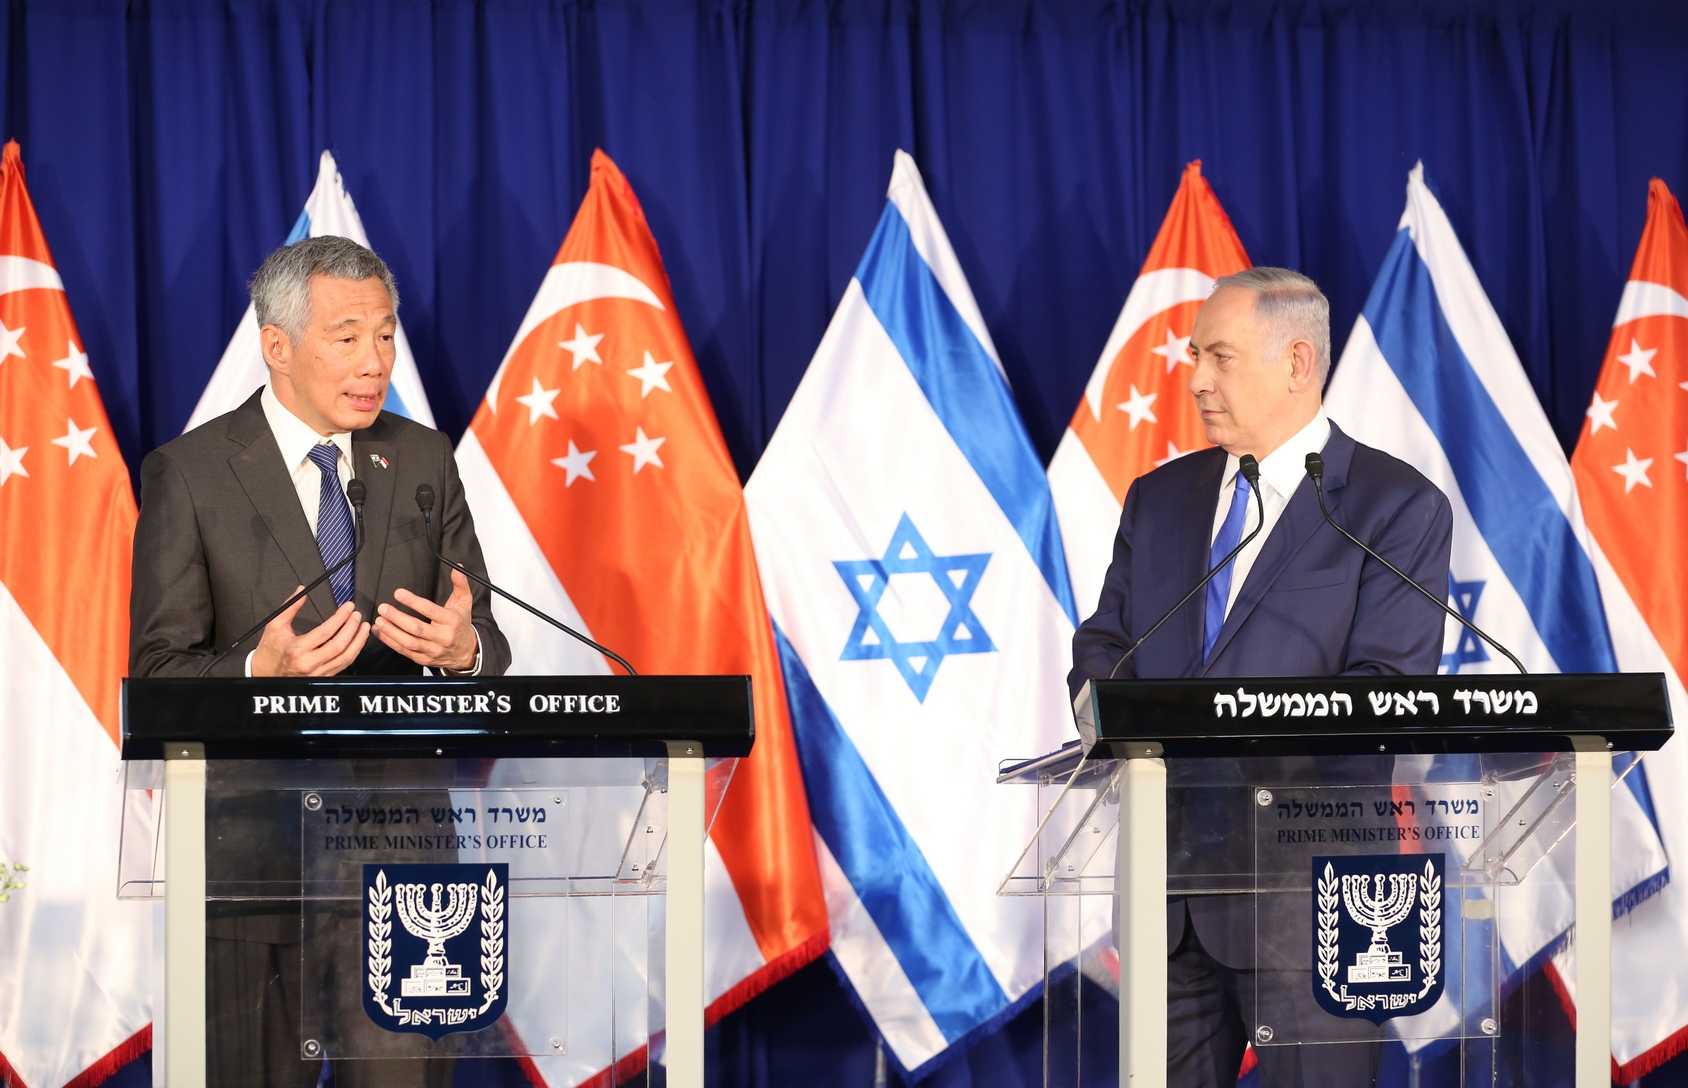 PM Lee Hsien Loong at the Welcome Ceremony for Visit to Israel